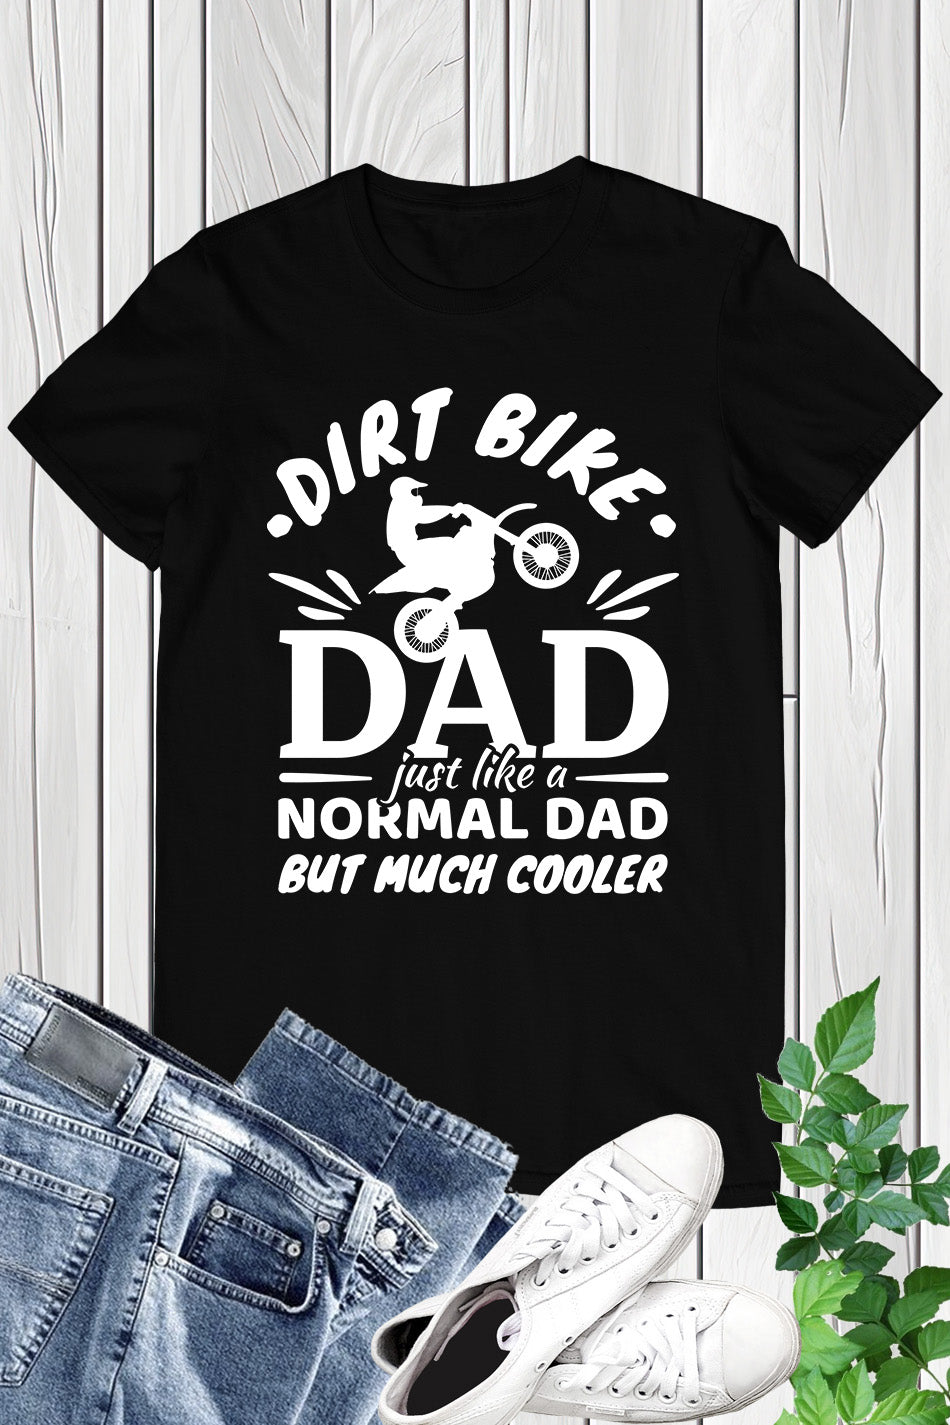 Dirt Bike Dad Like a Normal Dad but Cool Shirt